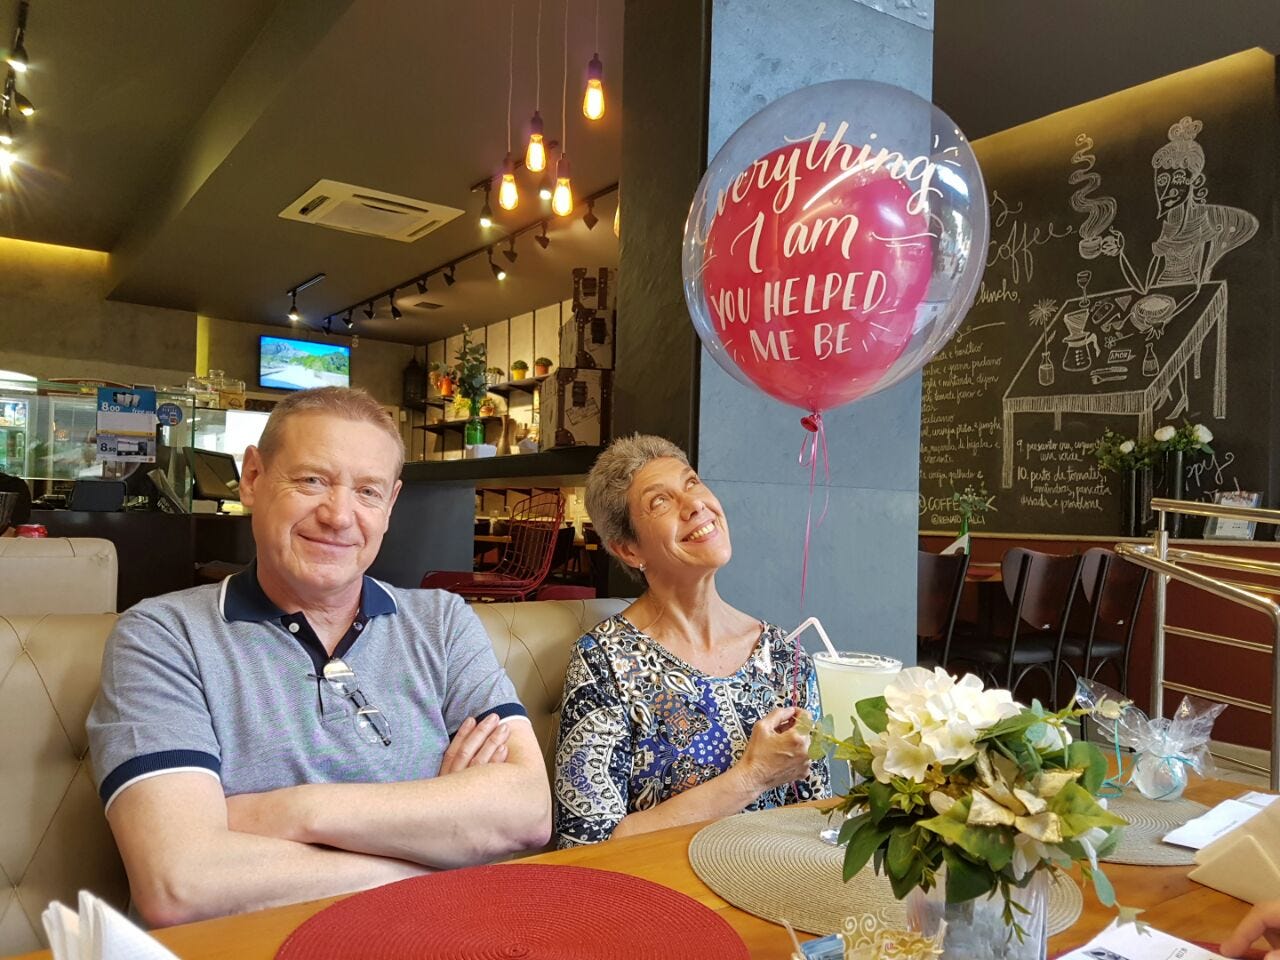 A white woman with white hair and a white man with blond hair, both in their 60s, sit in a restaurant booth. The woman holds a ballon.